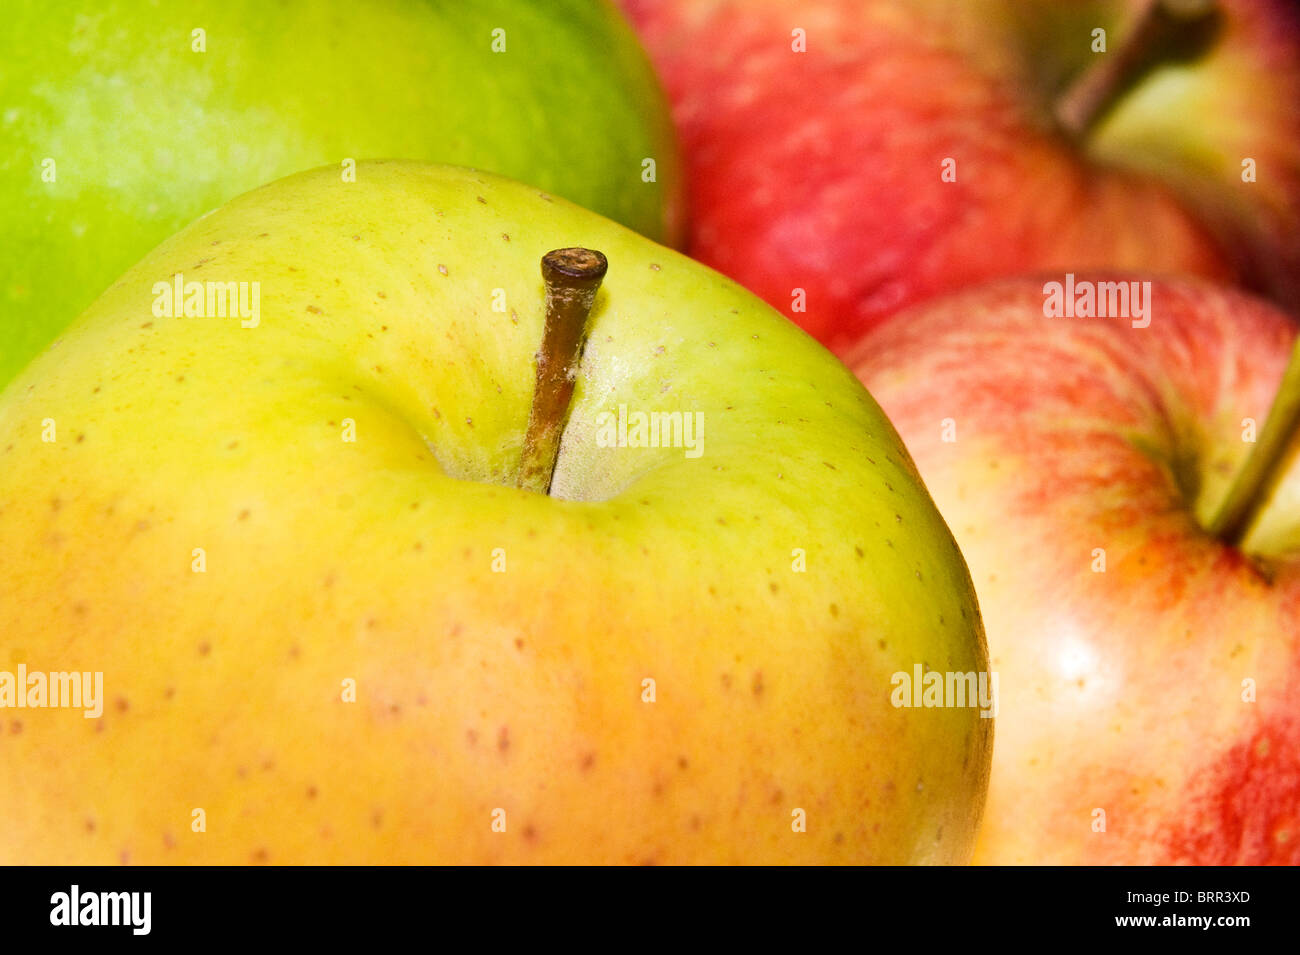 Close-up studio shot of four different varieties of apples Stock Photo